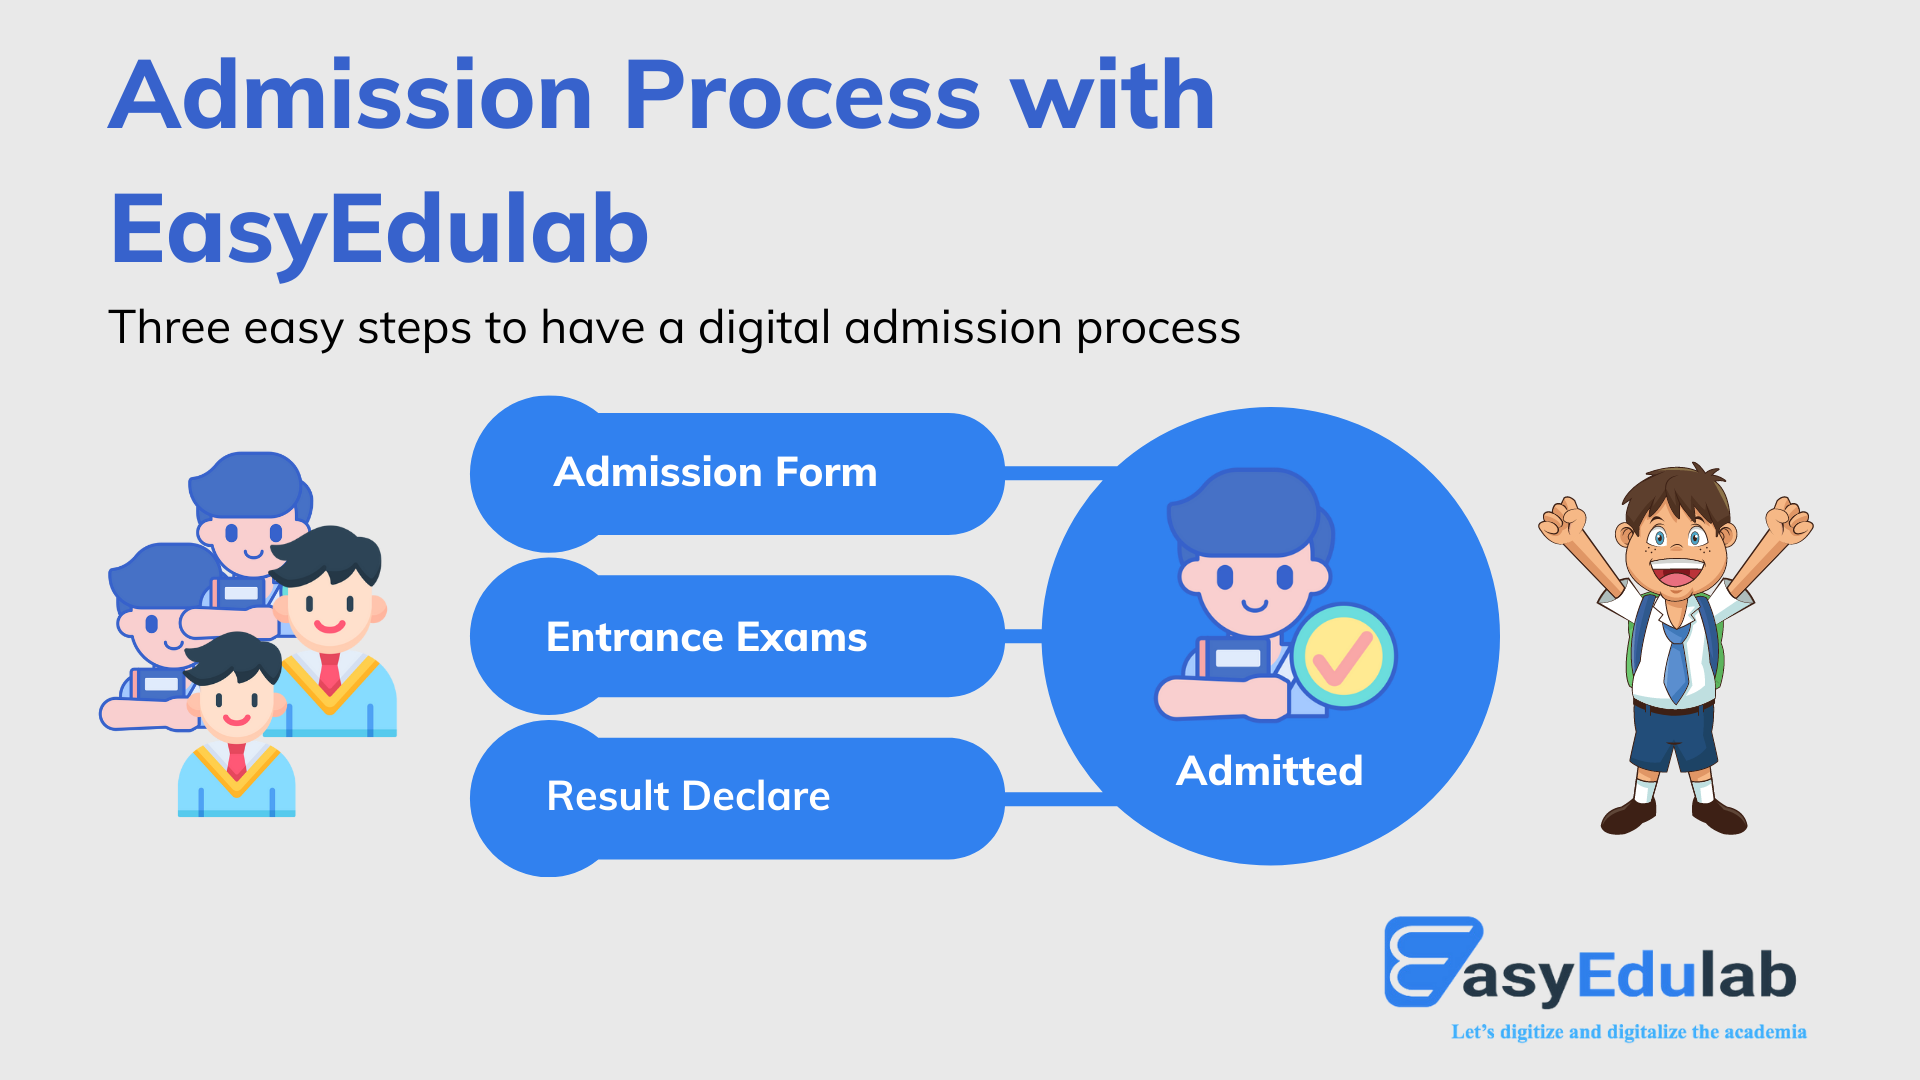 Digitize the school's admission process